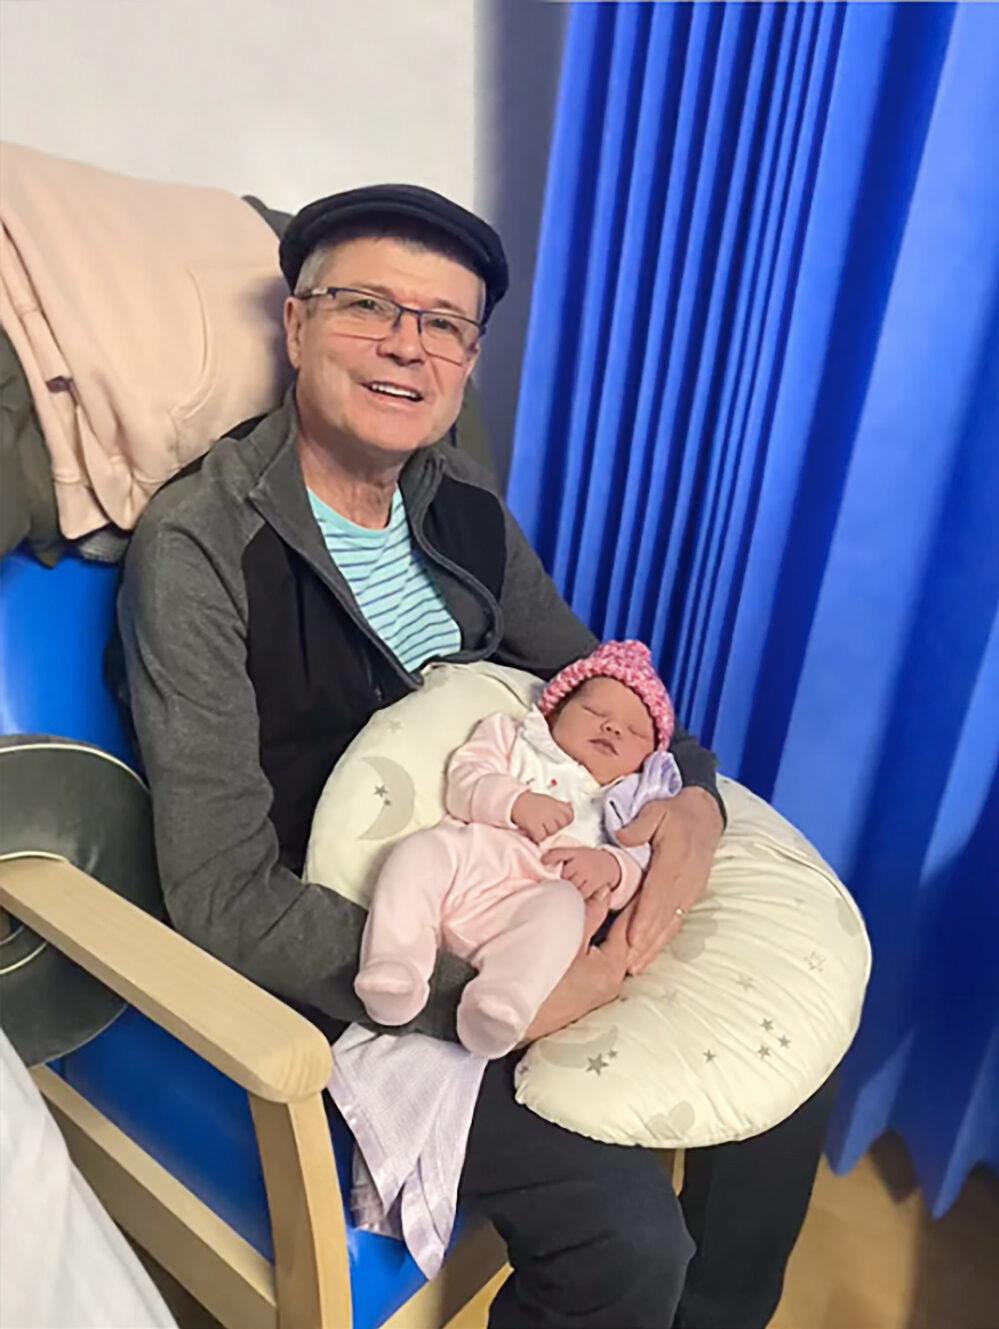 Edward is holding his grandkid Amelia for the first time. (Courtesy of <a href="https://www.instagram.com/lucygemmaogrady/">Lucy Watts</a>)